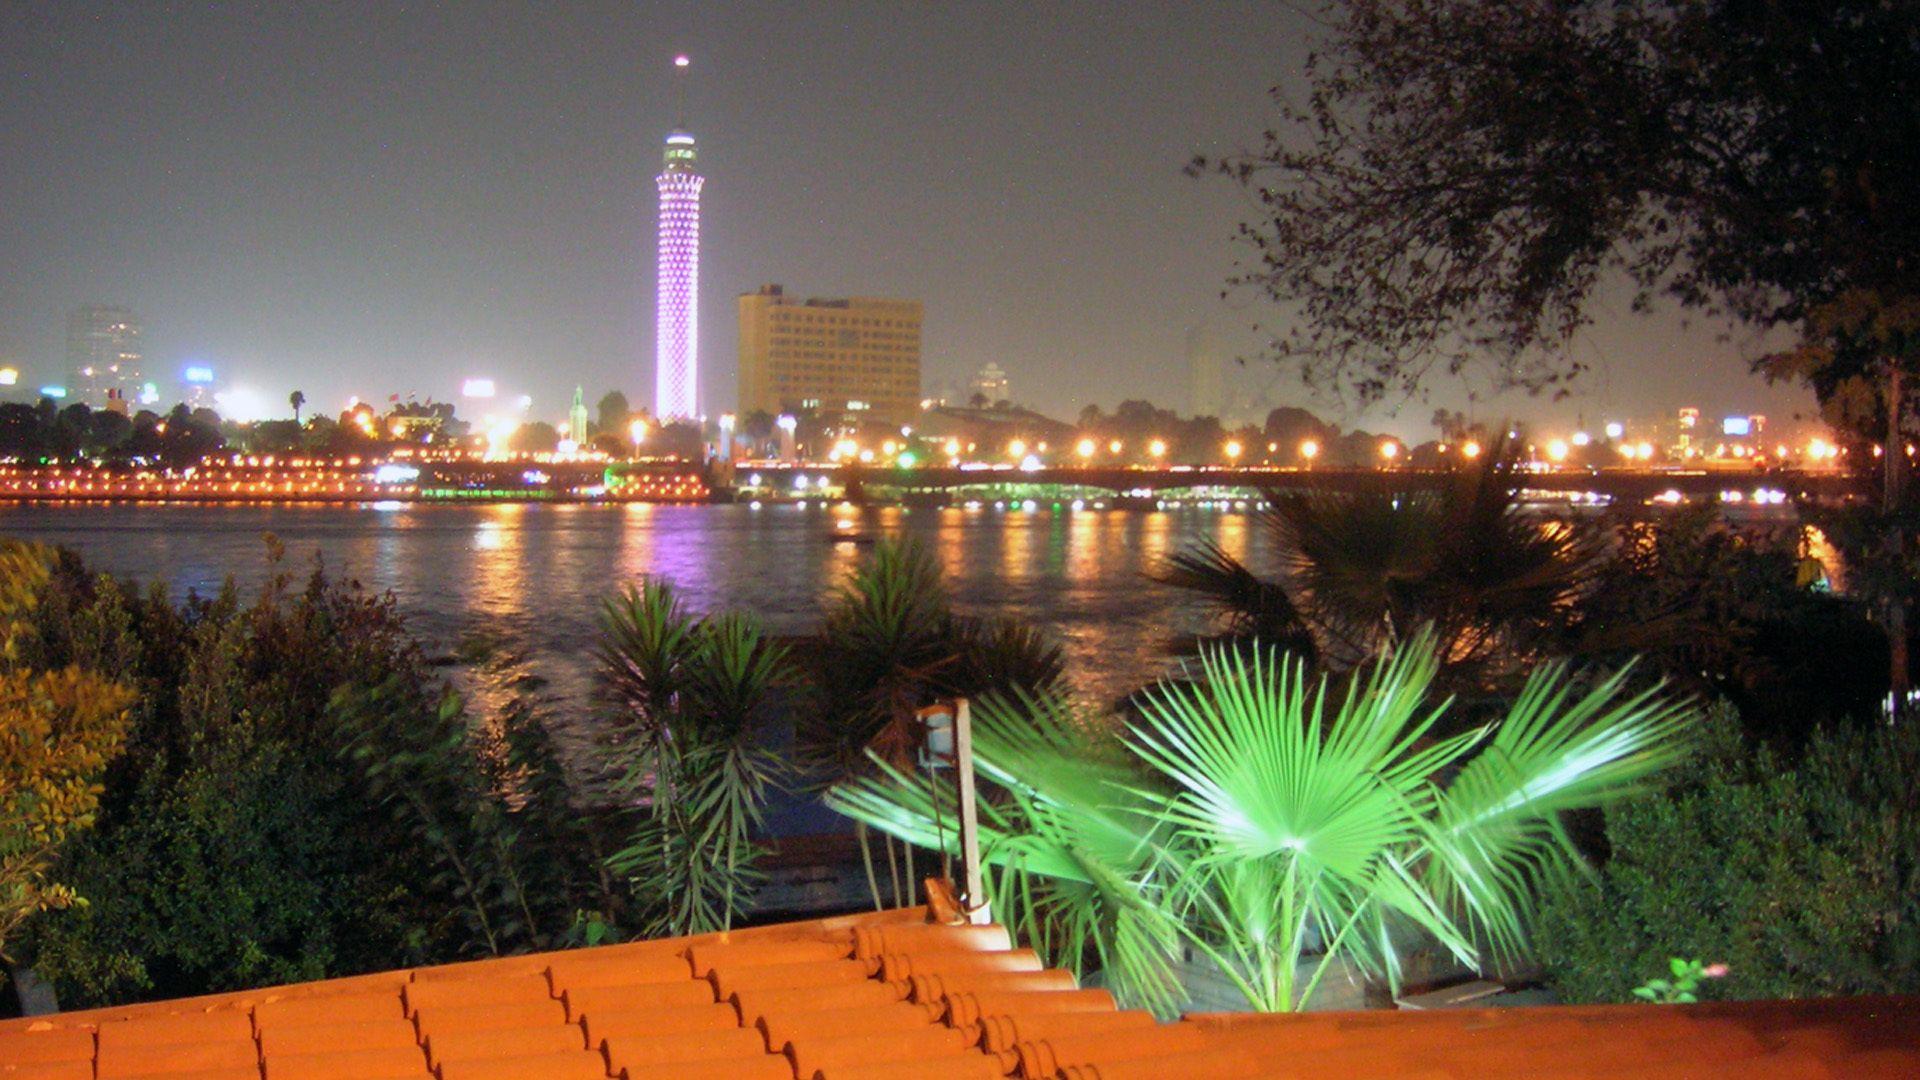 The Nile River in Cairo wallpaper and image